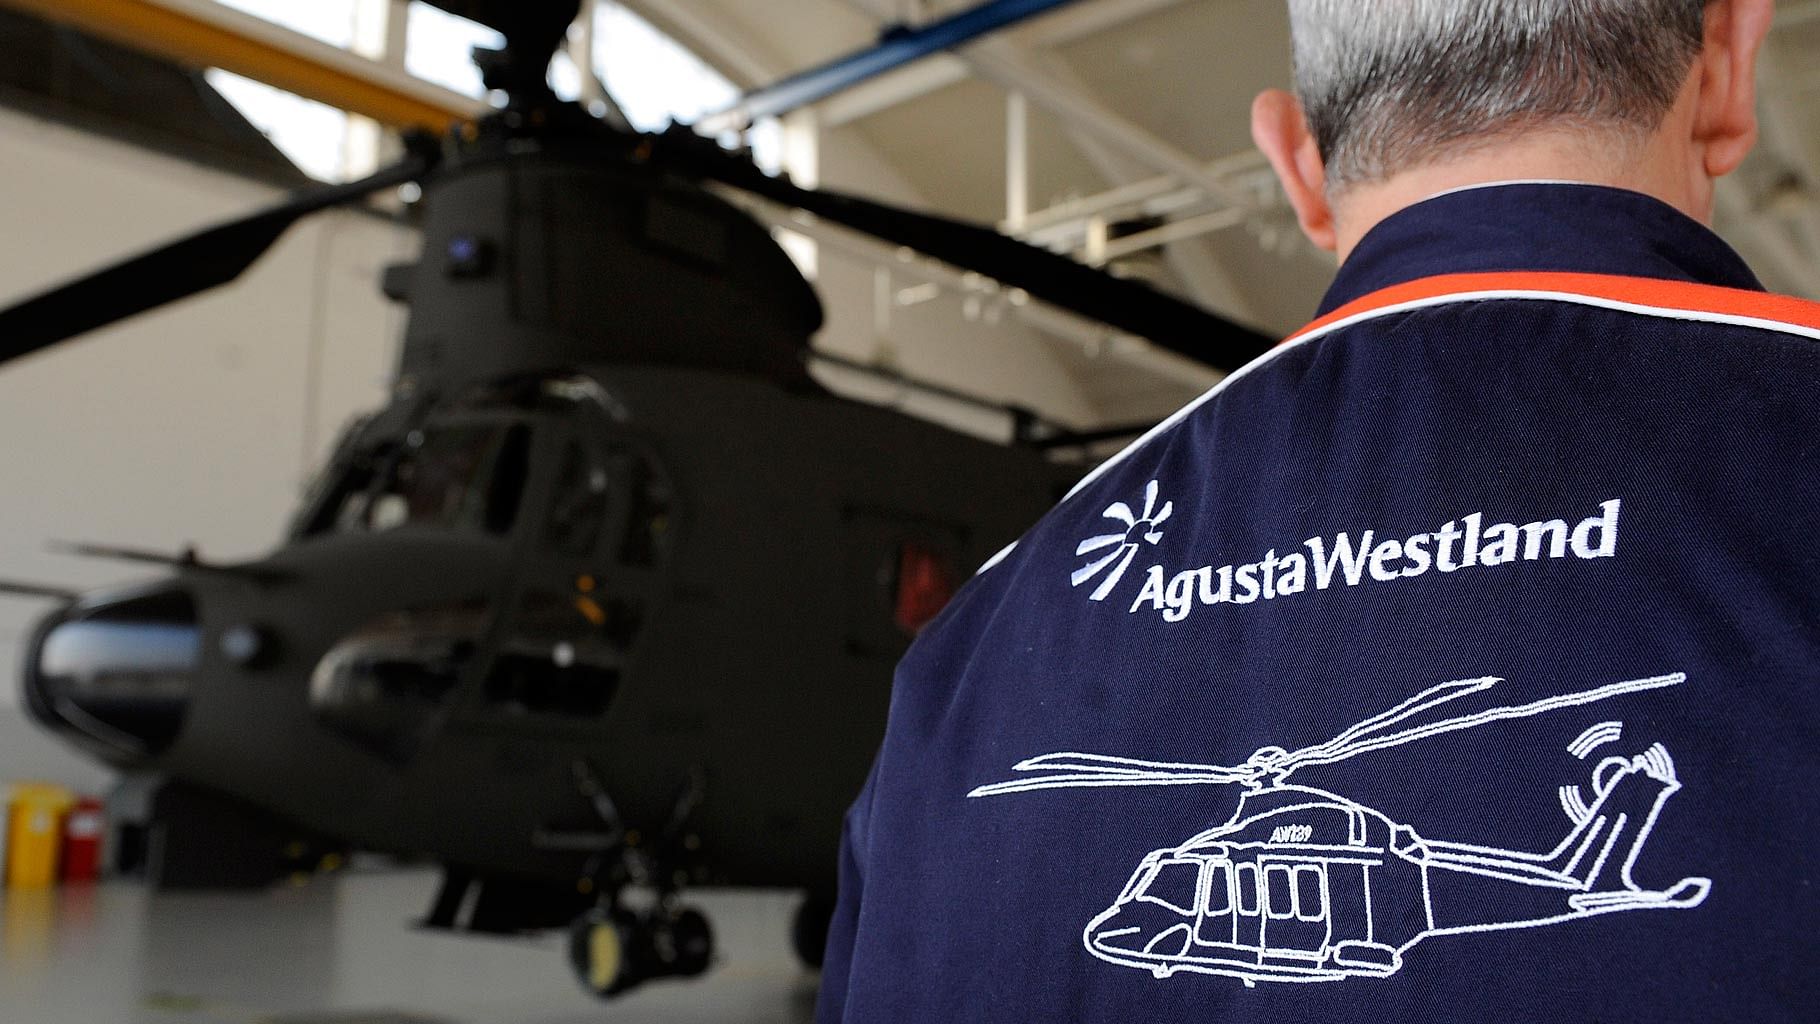 The Italian court had earlier ruled that the deal to purchase 12 VVIP helicopters by India from AgustaWestland involved international corruption. (Photo: Reuters)